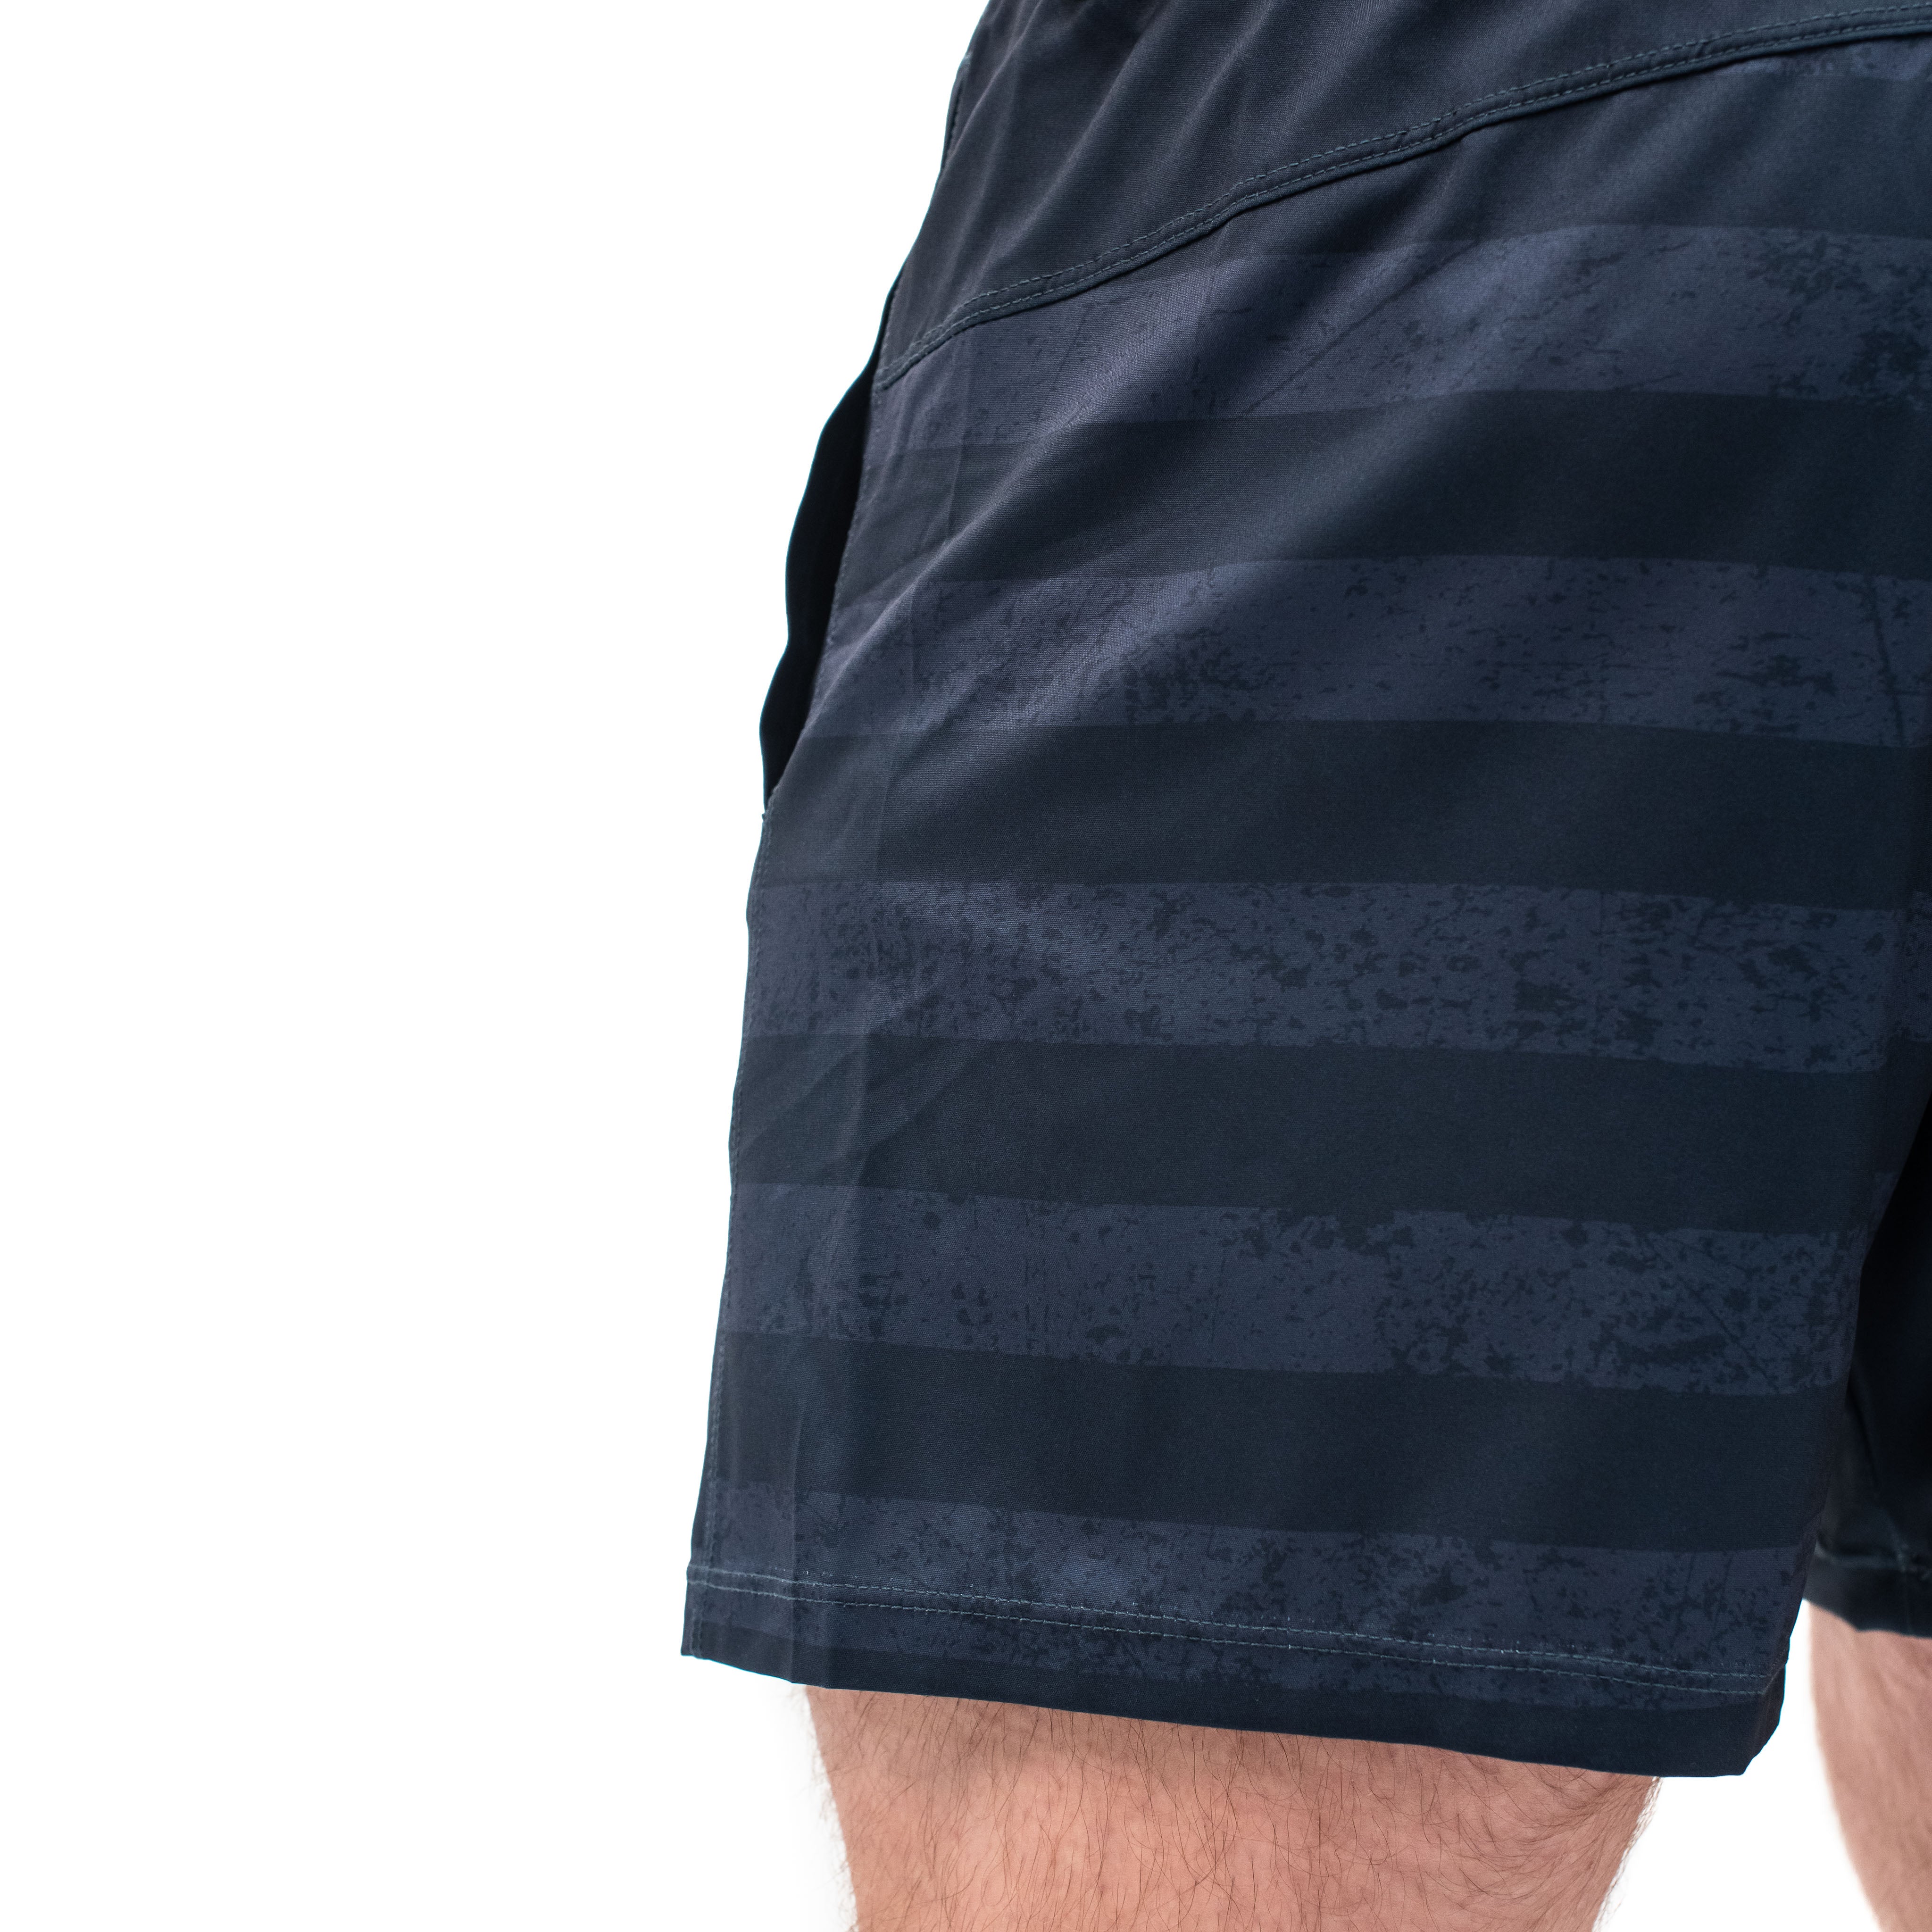 Have you ever squatted in shorts and realised that they may be too tight on you at the bottom of a squat? We have solved this problem with A7 Centre-stretch Squat Shorts. The shorts are made with stretchy fabric in between legs so you are never constricted during your squat. KWD shorts have a shorter inseam and are designed to show off your quads (KWaDs).